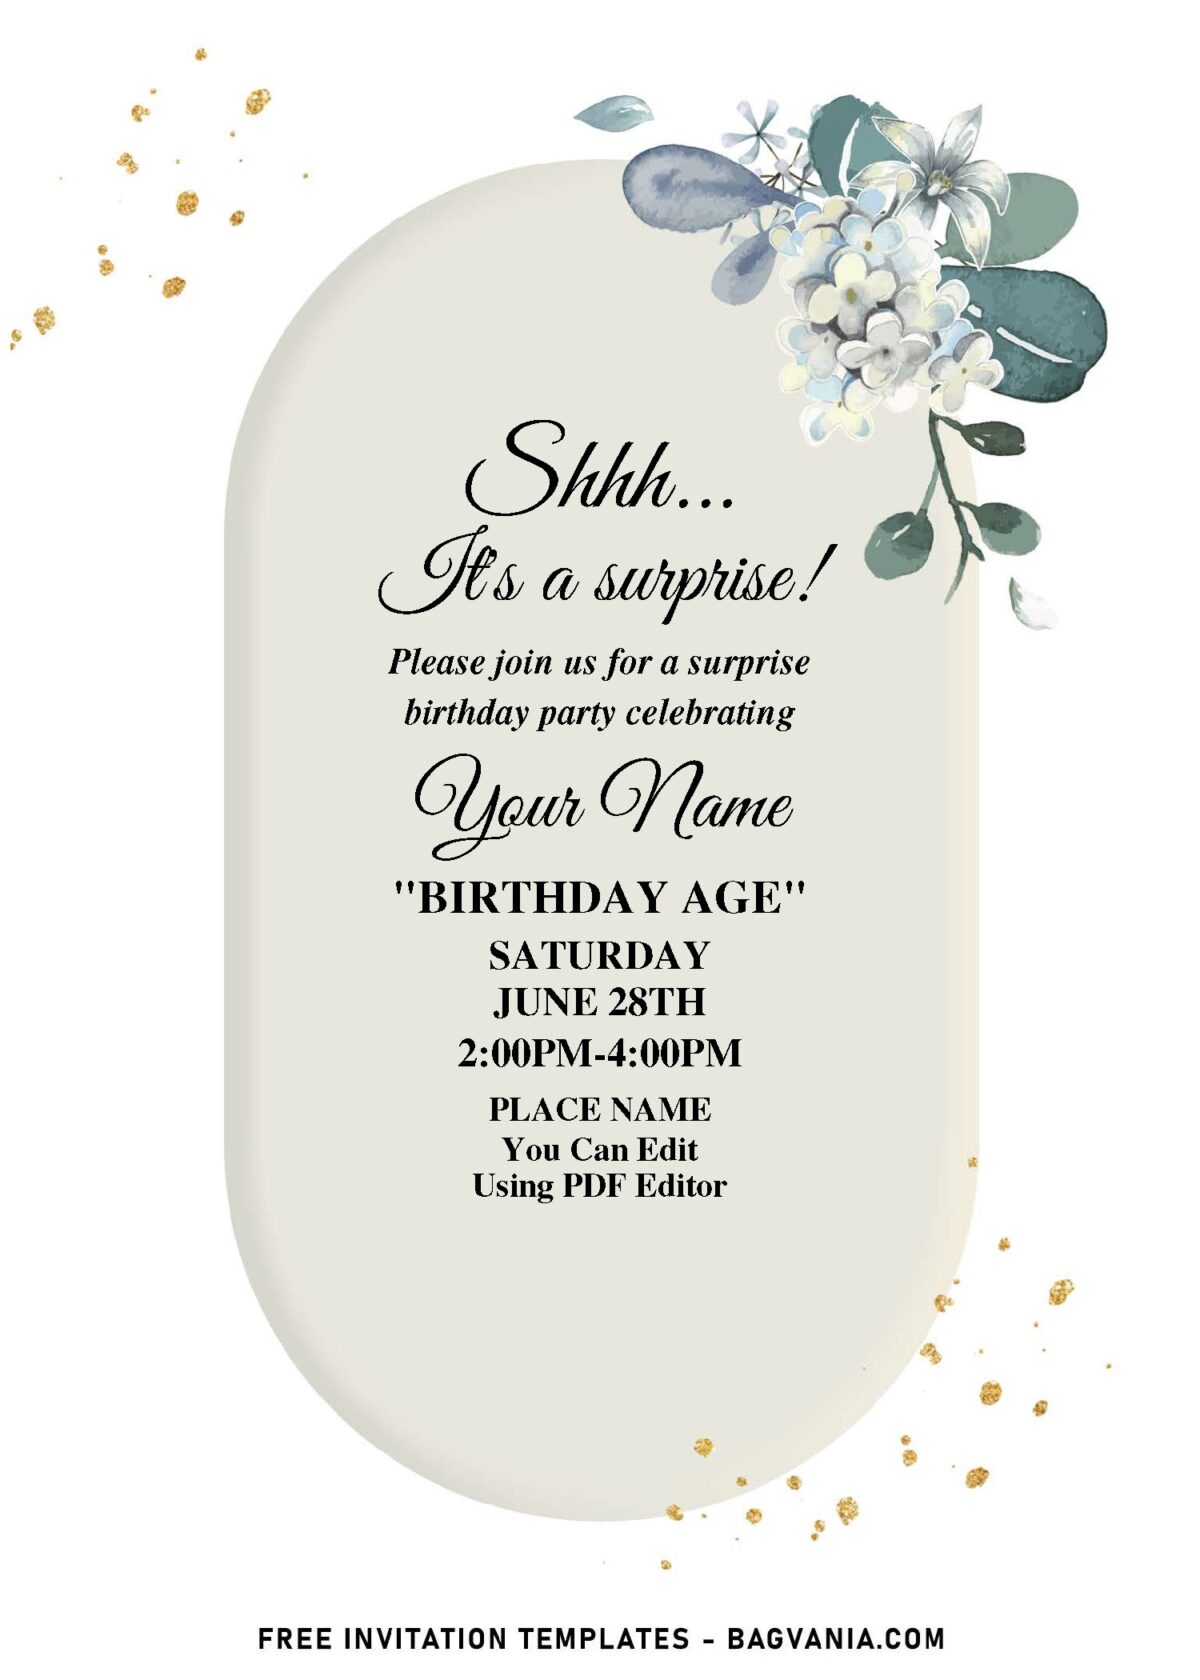 (Free Editable PDF) Cheerful Spring Dogwood And Floral Vines Birthday Invitation Templates with sparkly gold glitters